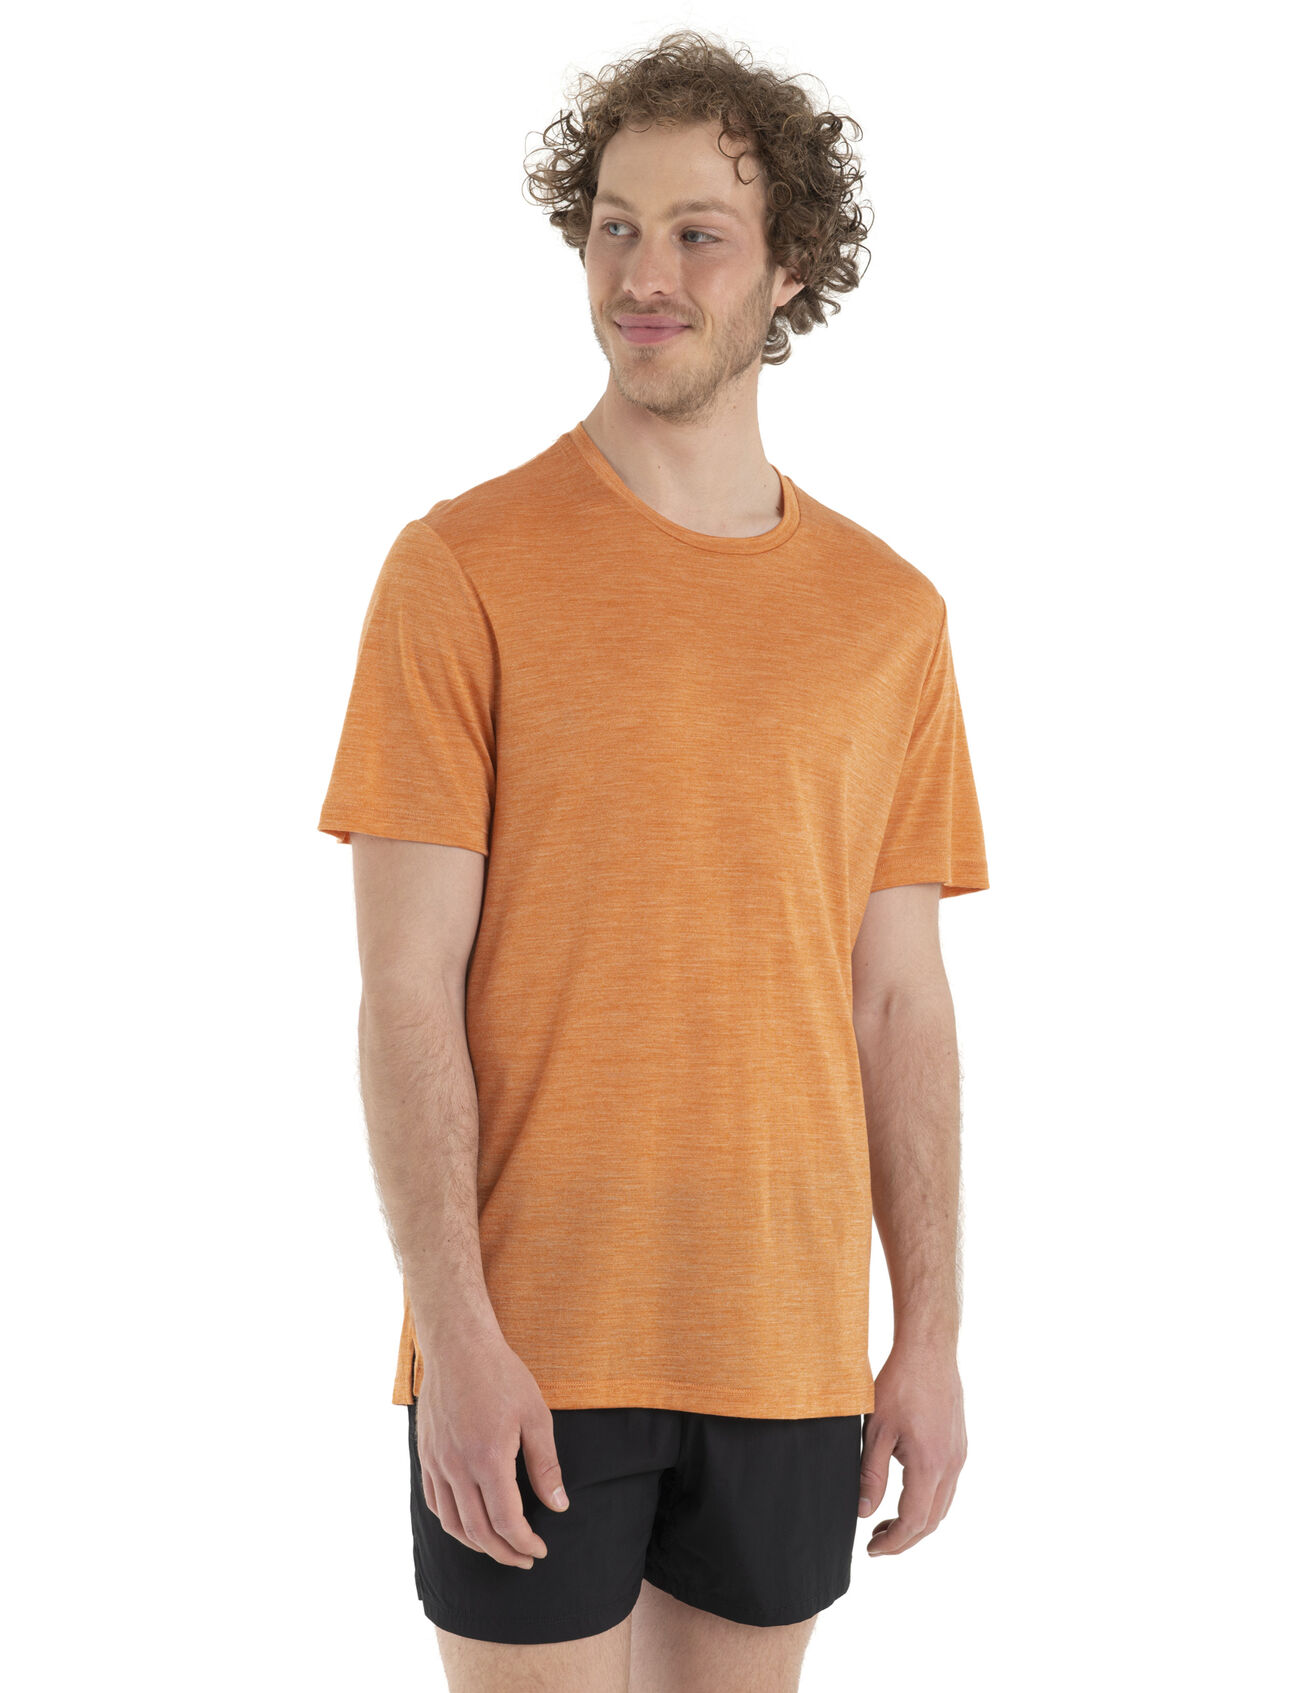 Mens Merino Sphere II Short Sleeve Tee A soft merino-blend tee made with our lightweight Cool-Lite™ jersey fabric, the Sphere II Short Sleeve Tee provides natural breathability, odor resistance and comfort.